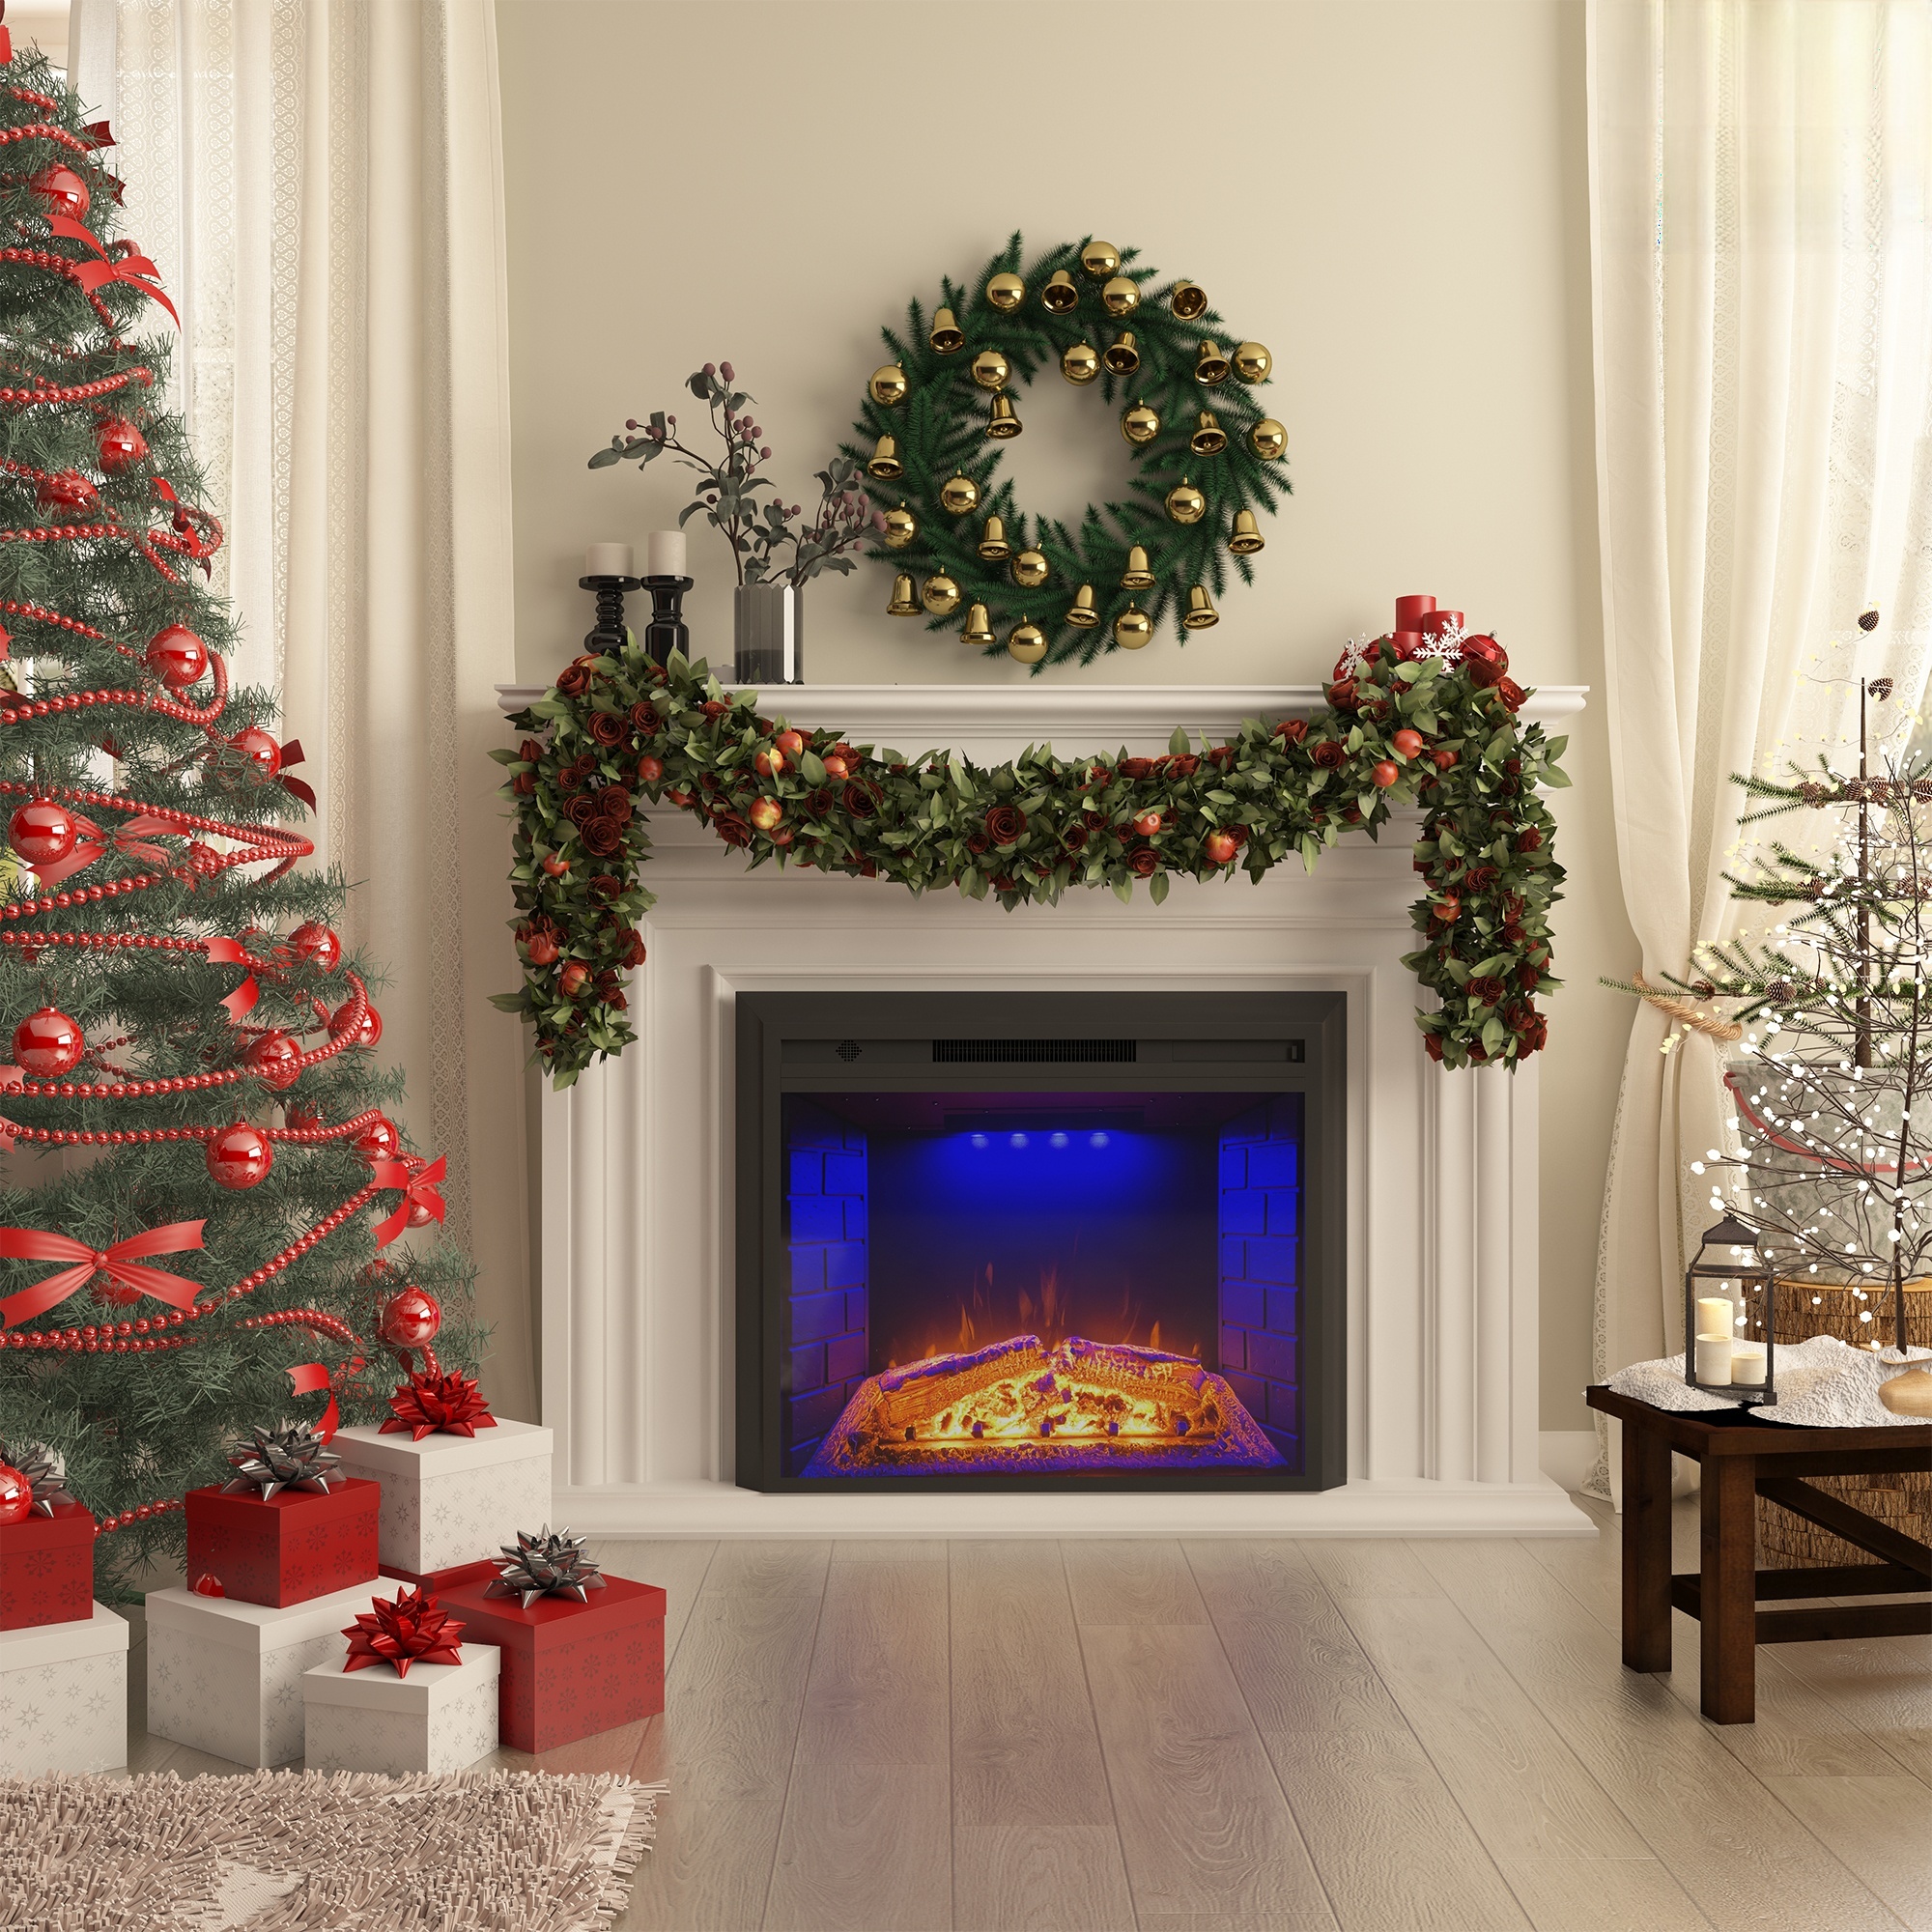 Electric Fireplace Insert with Crackling Sound, 30 Inch Recessed Fireplace Heater